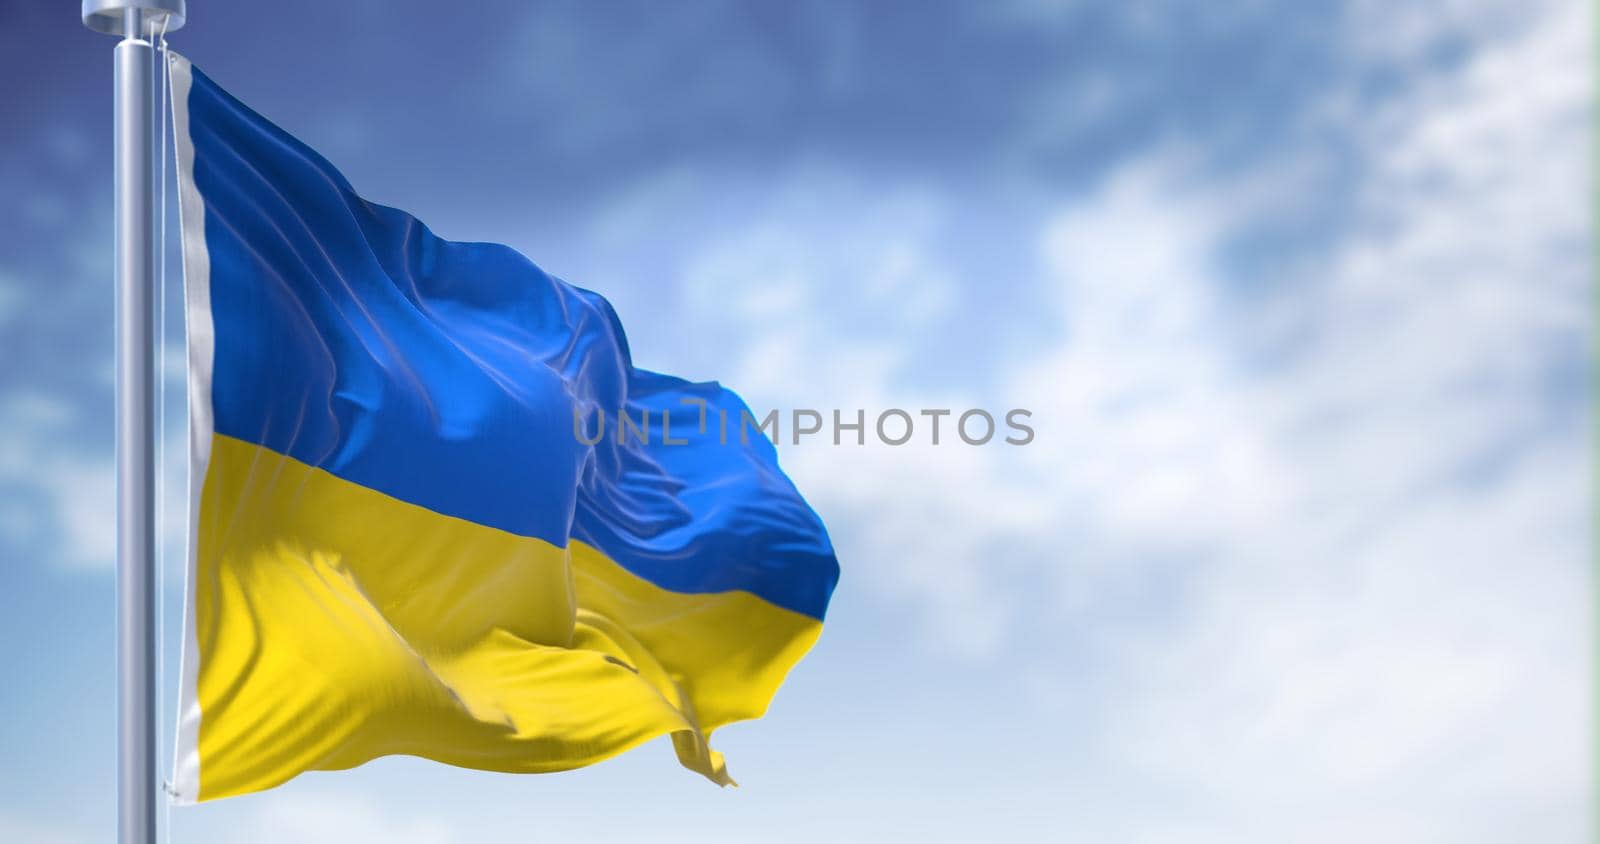 Detail of the national flag of Ukraine waving in the wind on a clear day by rarrarorro